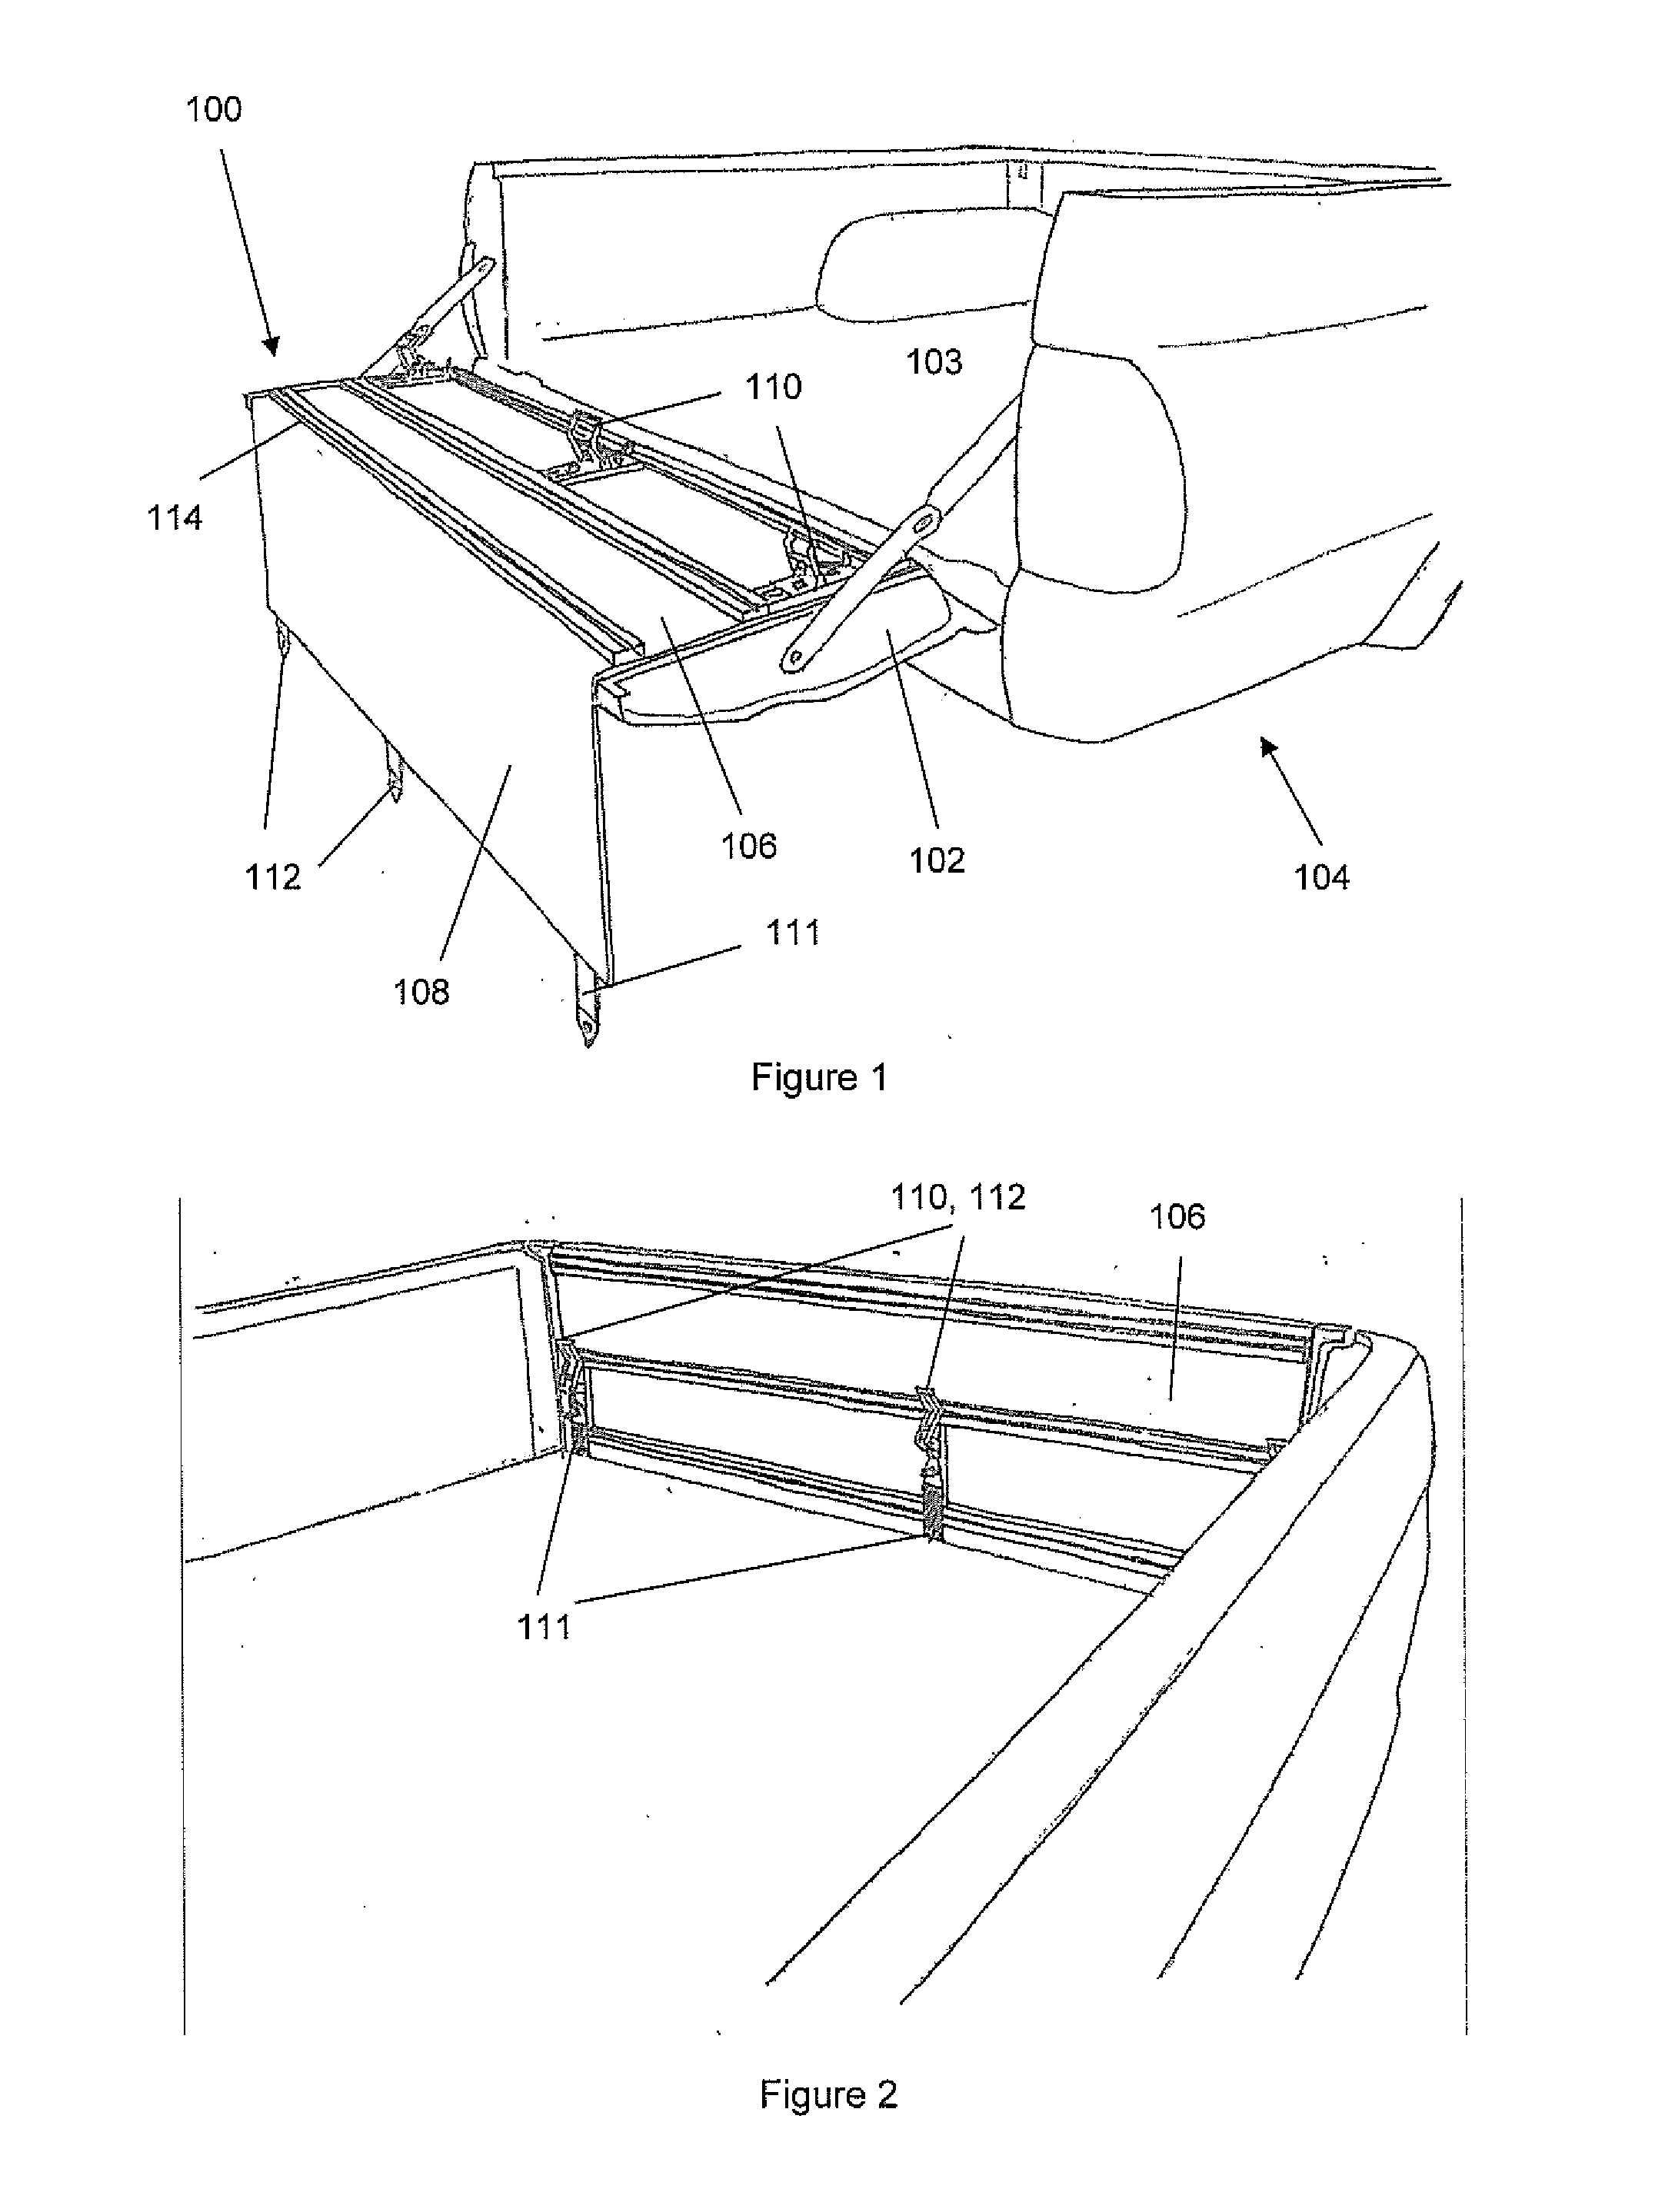 Mounting Device for Mounting an Object to a Vehicle